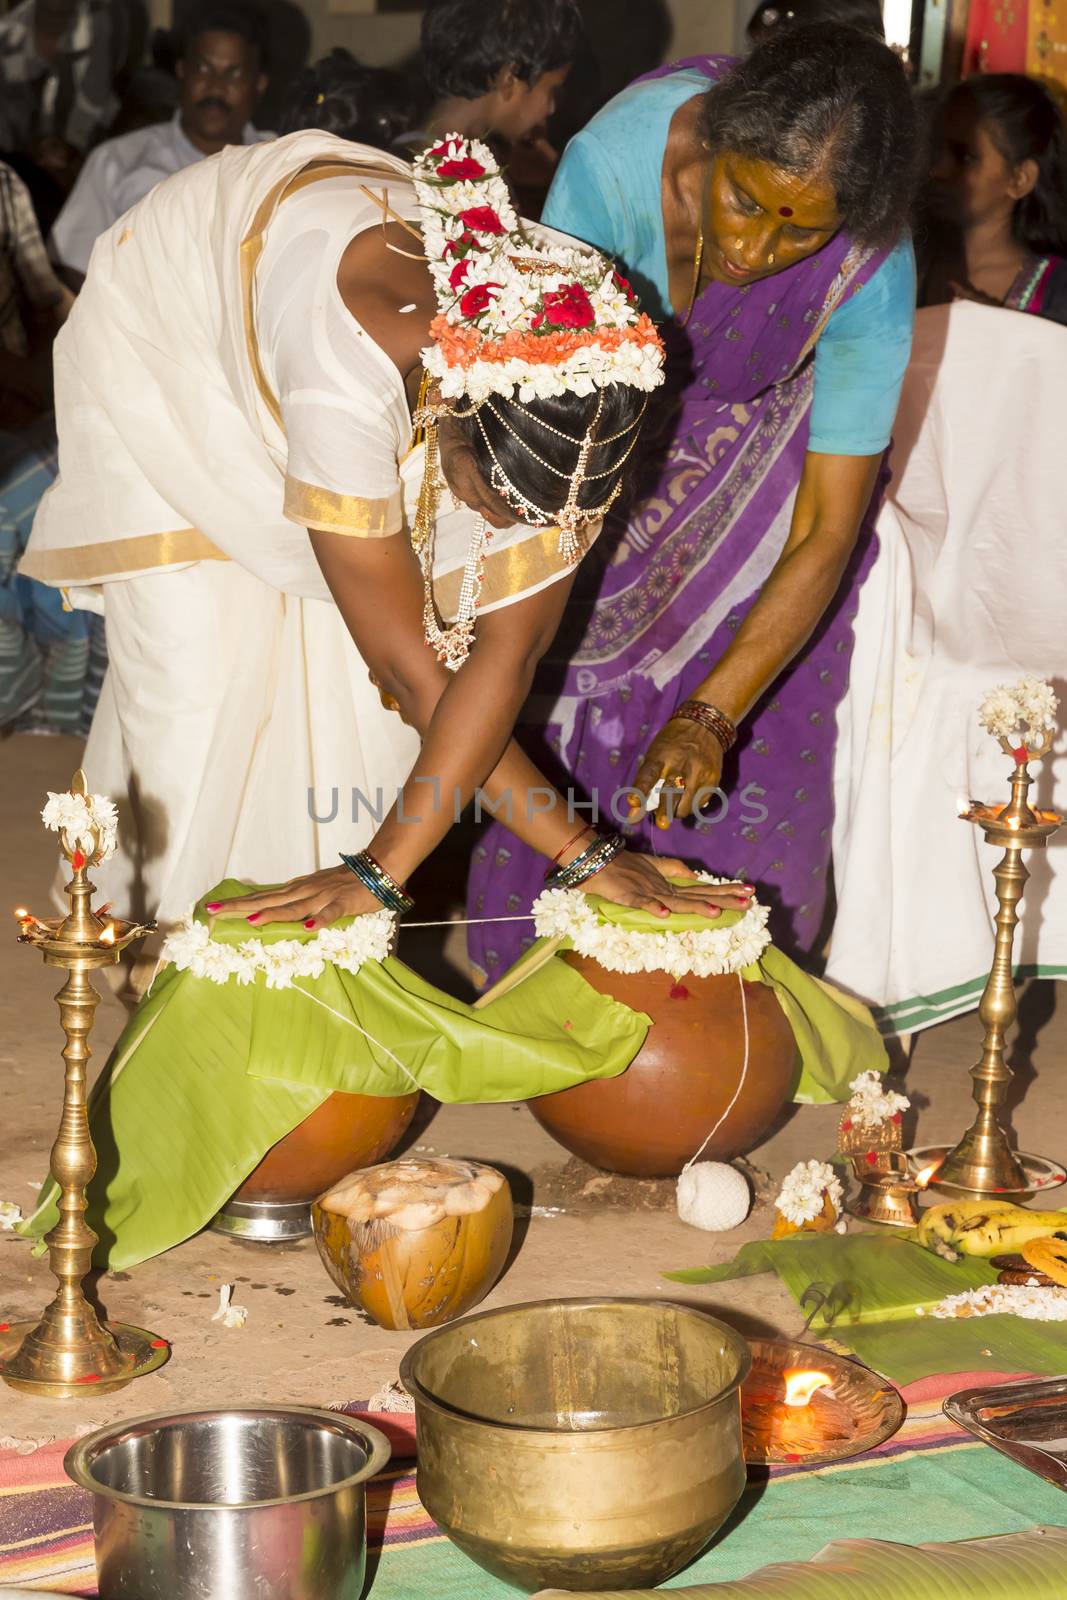 Documentary image : India Puja before birth by CatherineL-Prod